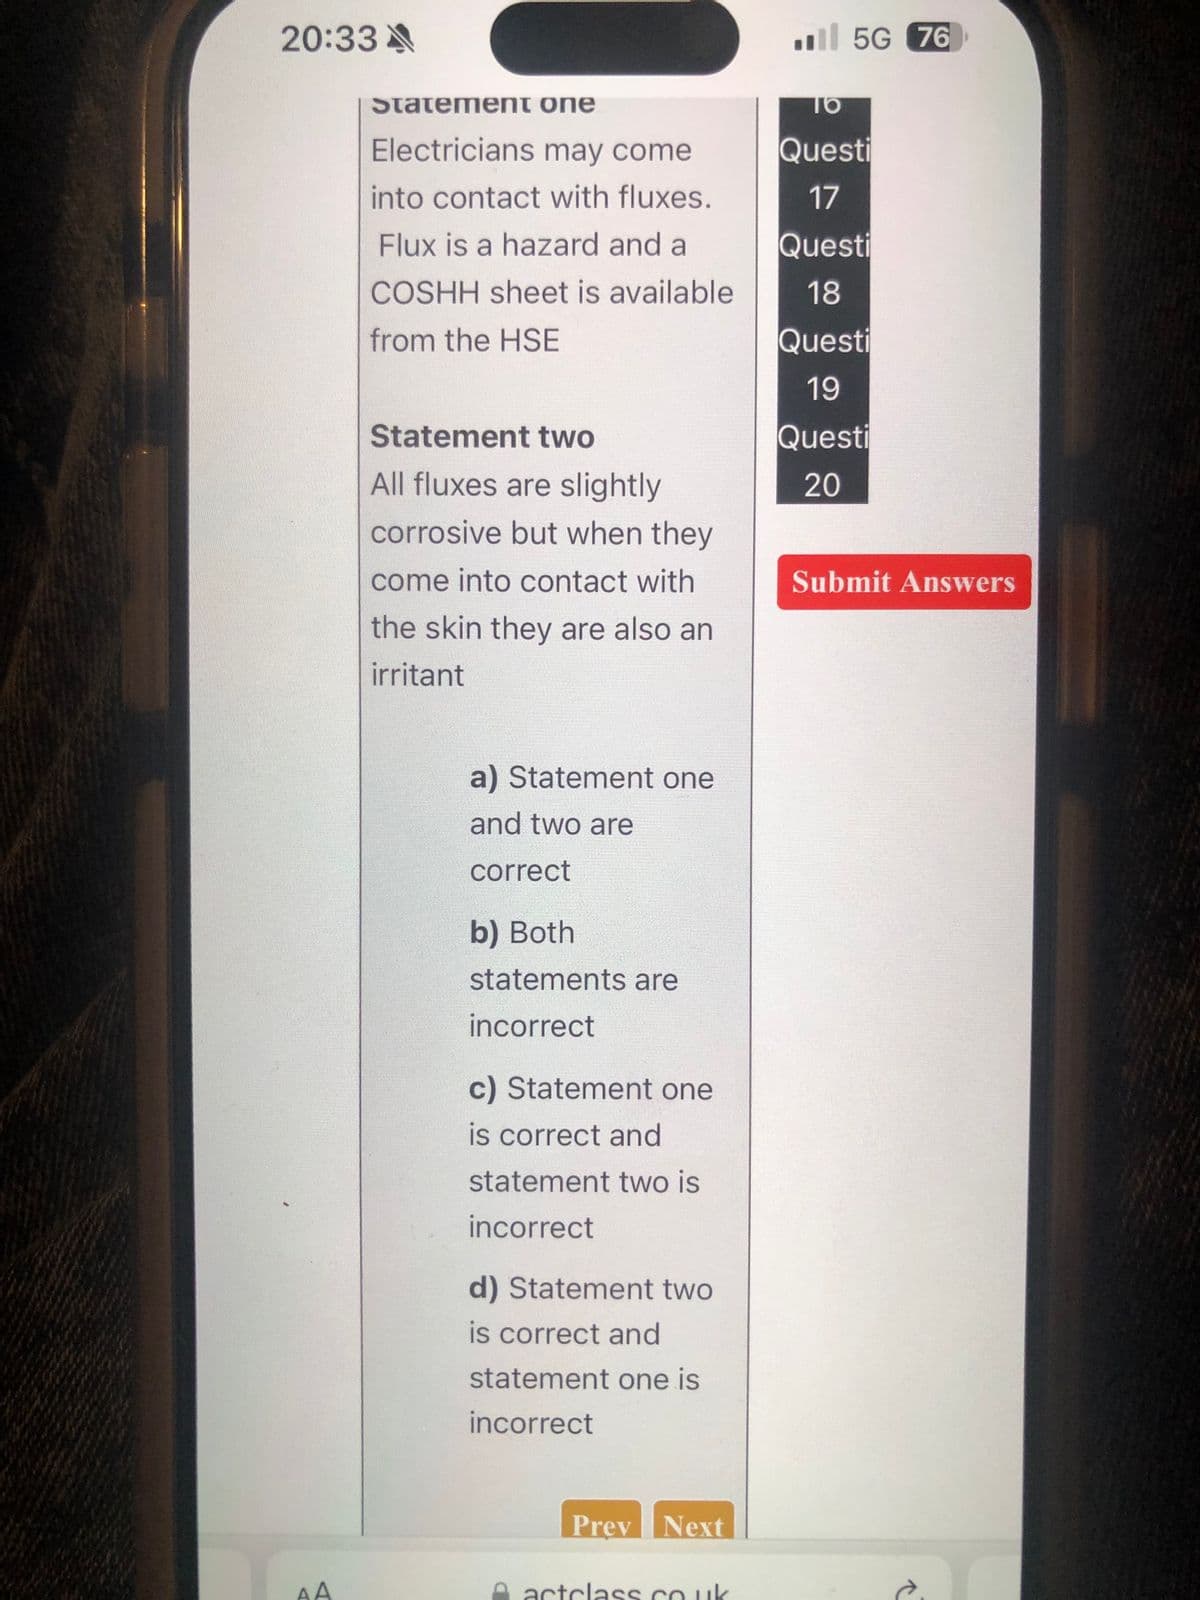 20:33
Statement one
Electricians may come
5G 76
TO
Questi
into contact with fluxes.
17
Flux is a hazard and a
Questi
COSHH sheet is available
18
from the HSE
Questi
19
Questi
20
Statement two
All fluxes are slightly
corrosive but when they
come into contact with
the skin they are also an
irritant
Submit Answers
a) Statement one
and two are
correct
b) Both
statements are
incorrect
c) Statement one
is correct and
statement two is
incorrect
d) Statement two
is correct and
statement one is
incorrect
AA
Prev Next
actclass.co.uk